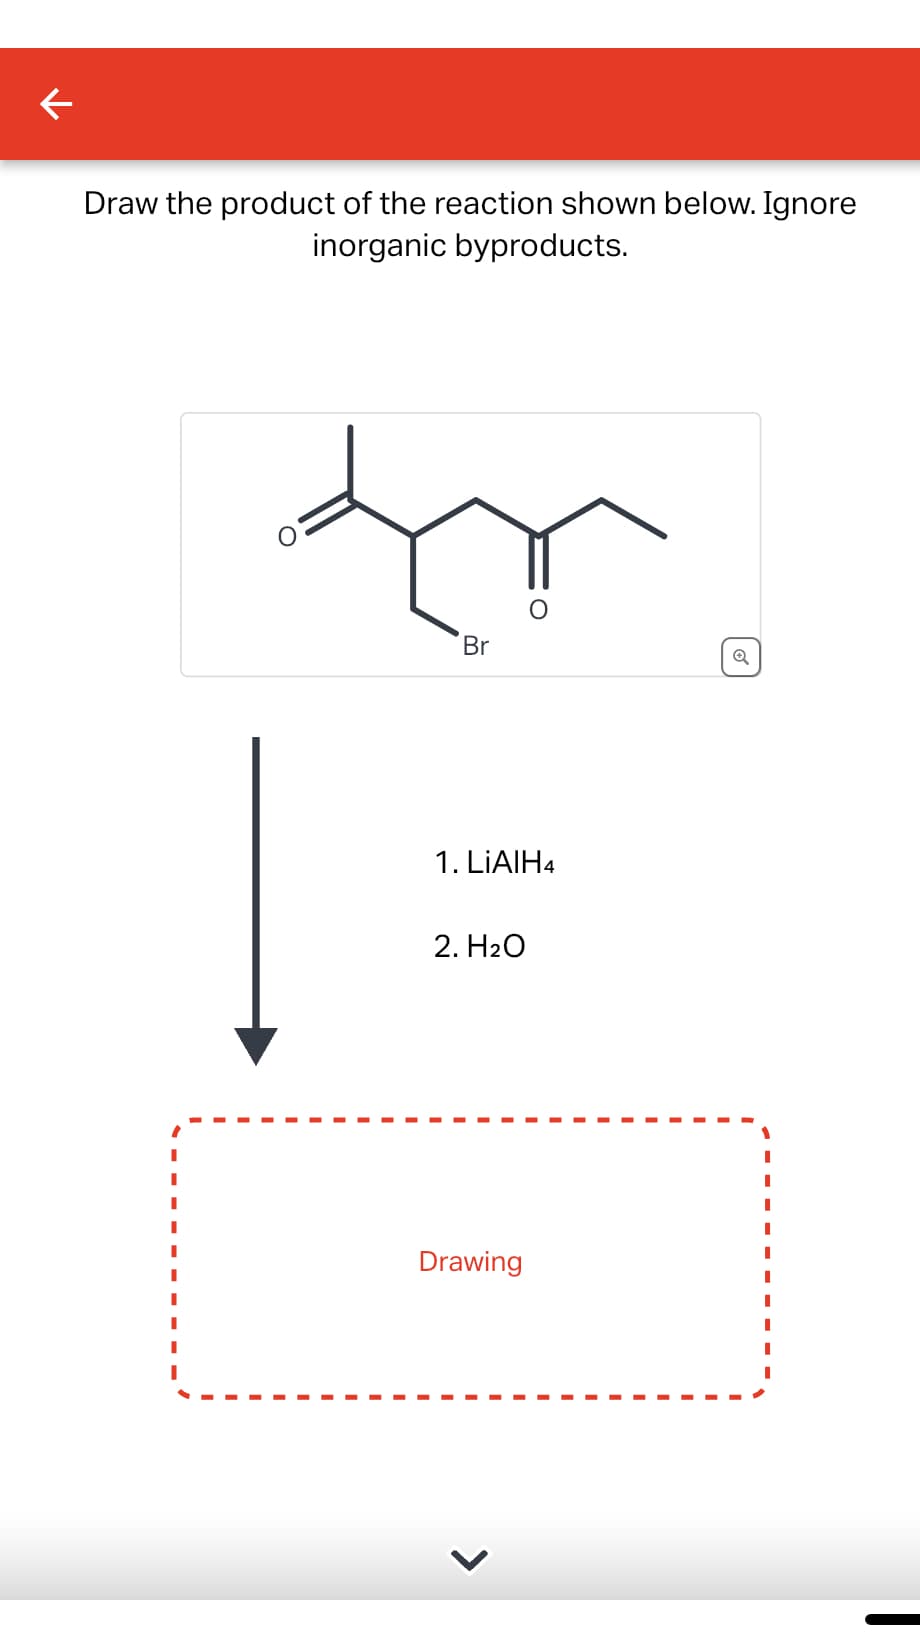 Draw the product of the reaction shown below. Ignore
inorganic byproducts.
Br
1. LiAlH4
2. H₂O
Drawing
<
Q